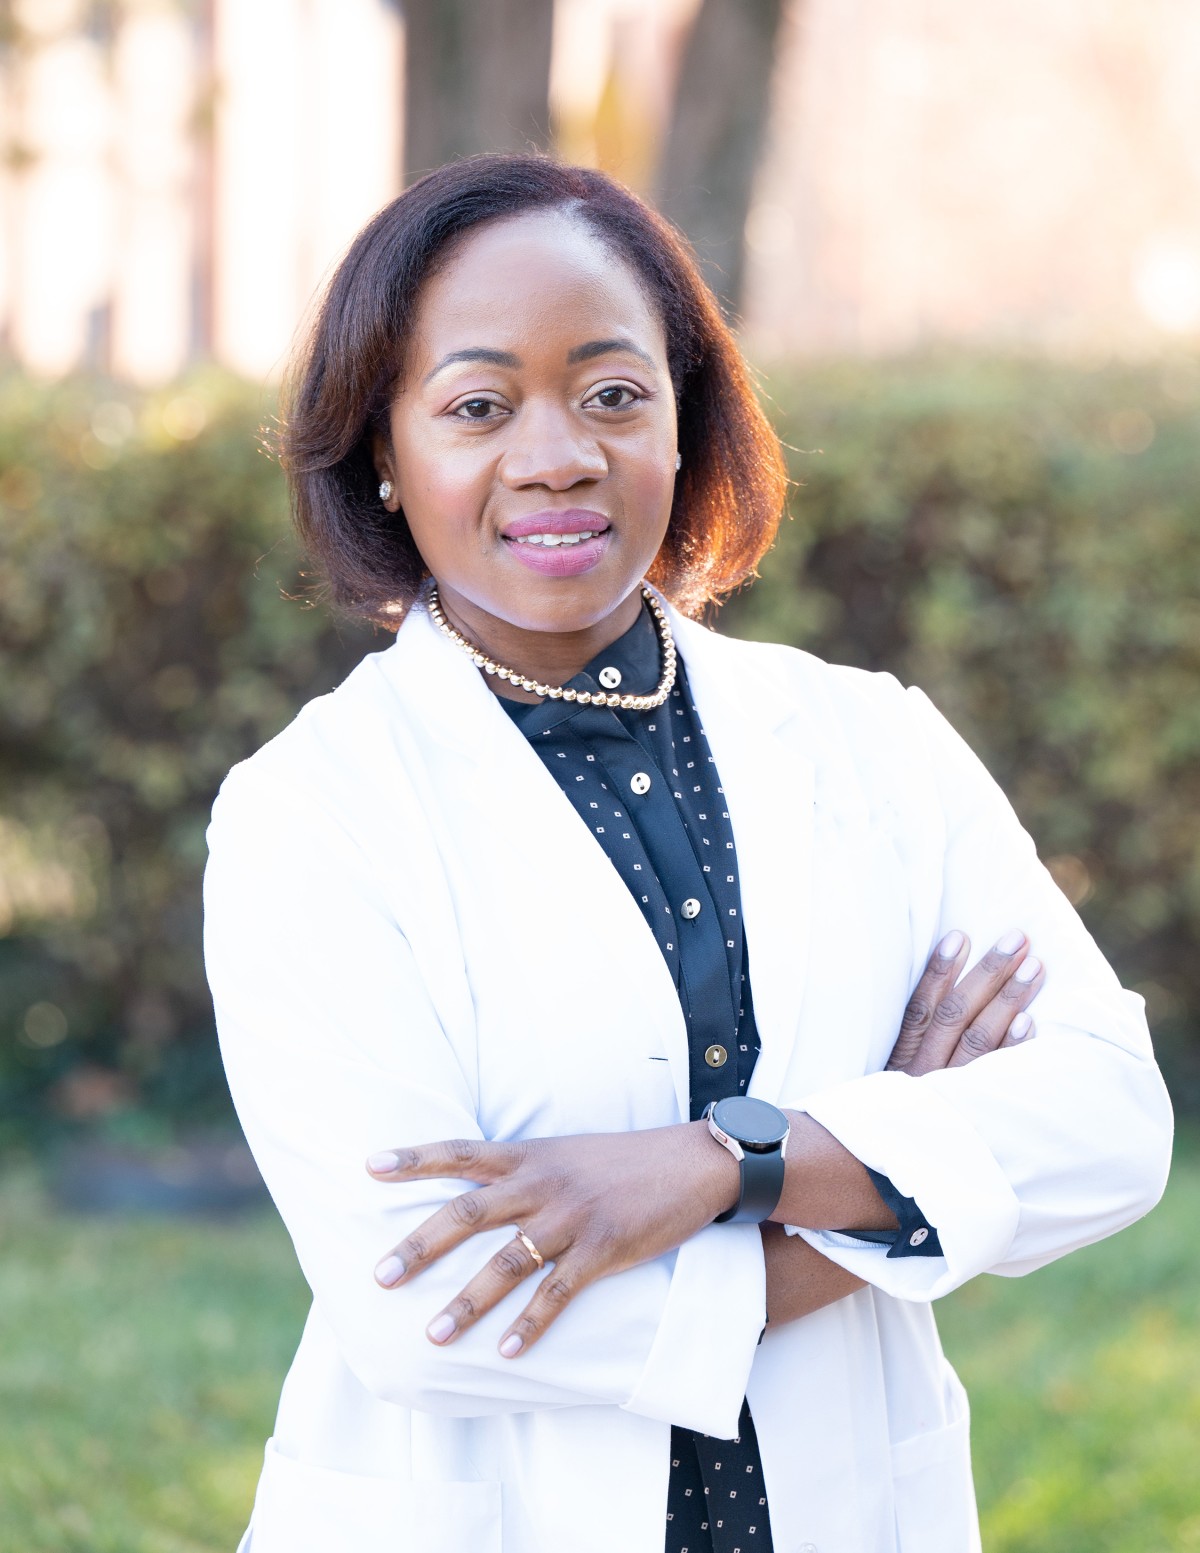 Fauquier Health Welcomes New General Surgeon Dr. Nchang Azefor